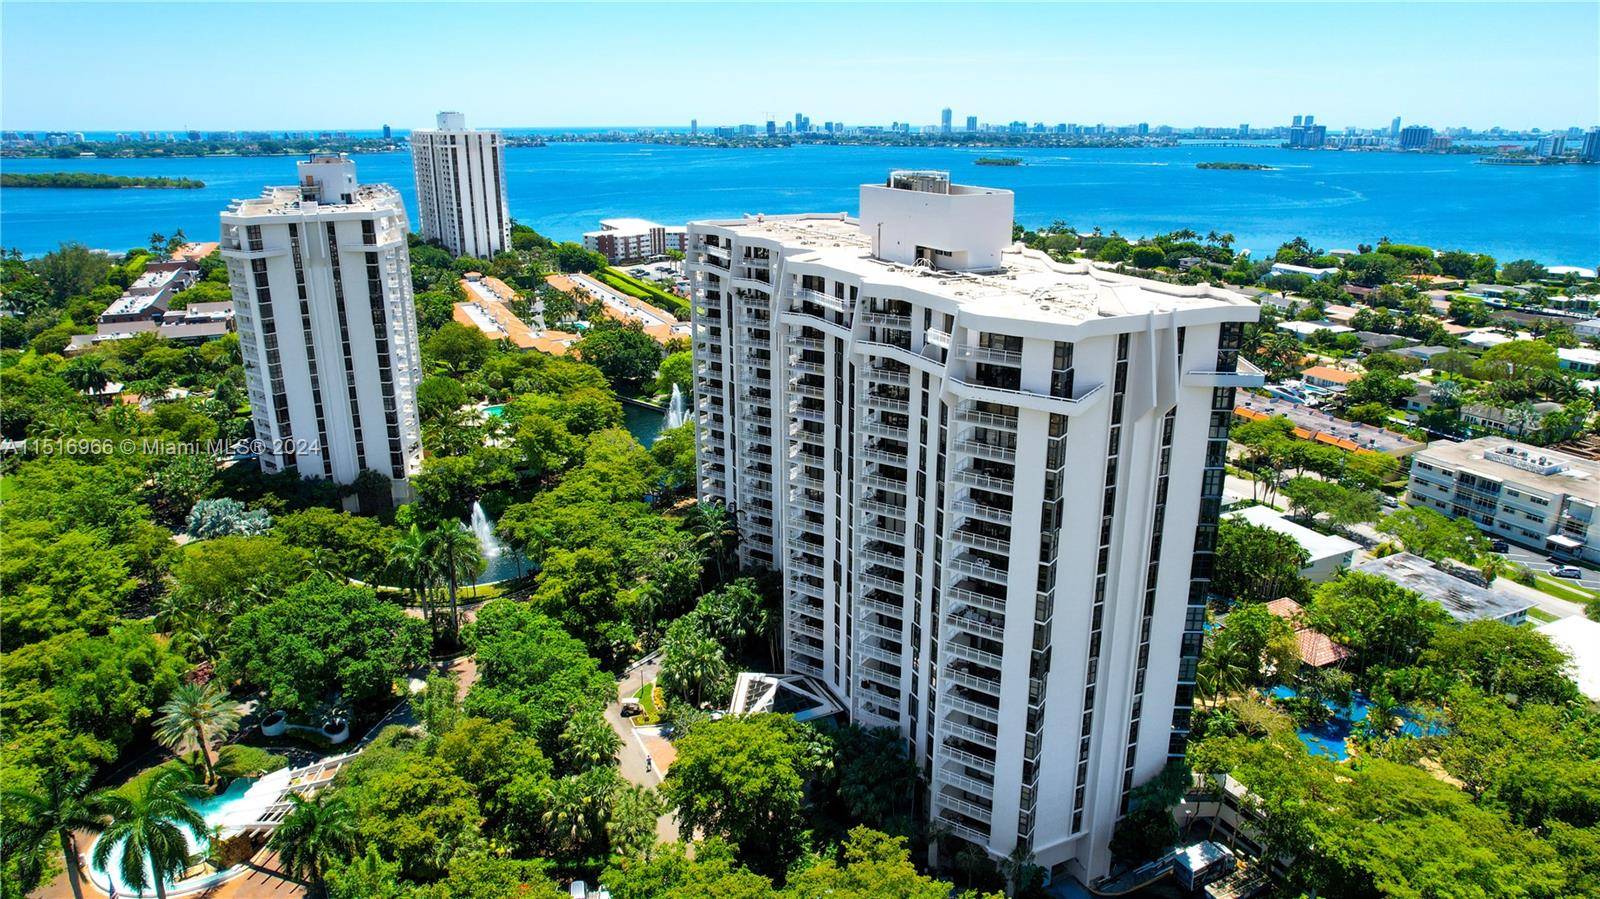 Price to sell ! Live like on a vacation the whole year in this beautiful unit, southeast direct water views from the 16th floor of the Biscayne Bay, Miami Beach, ...